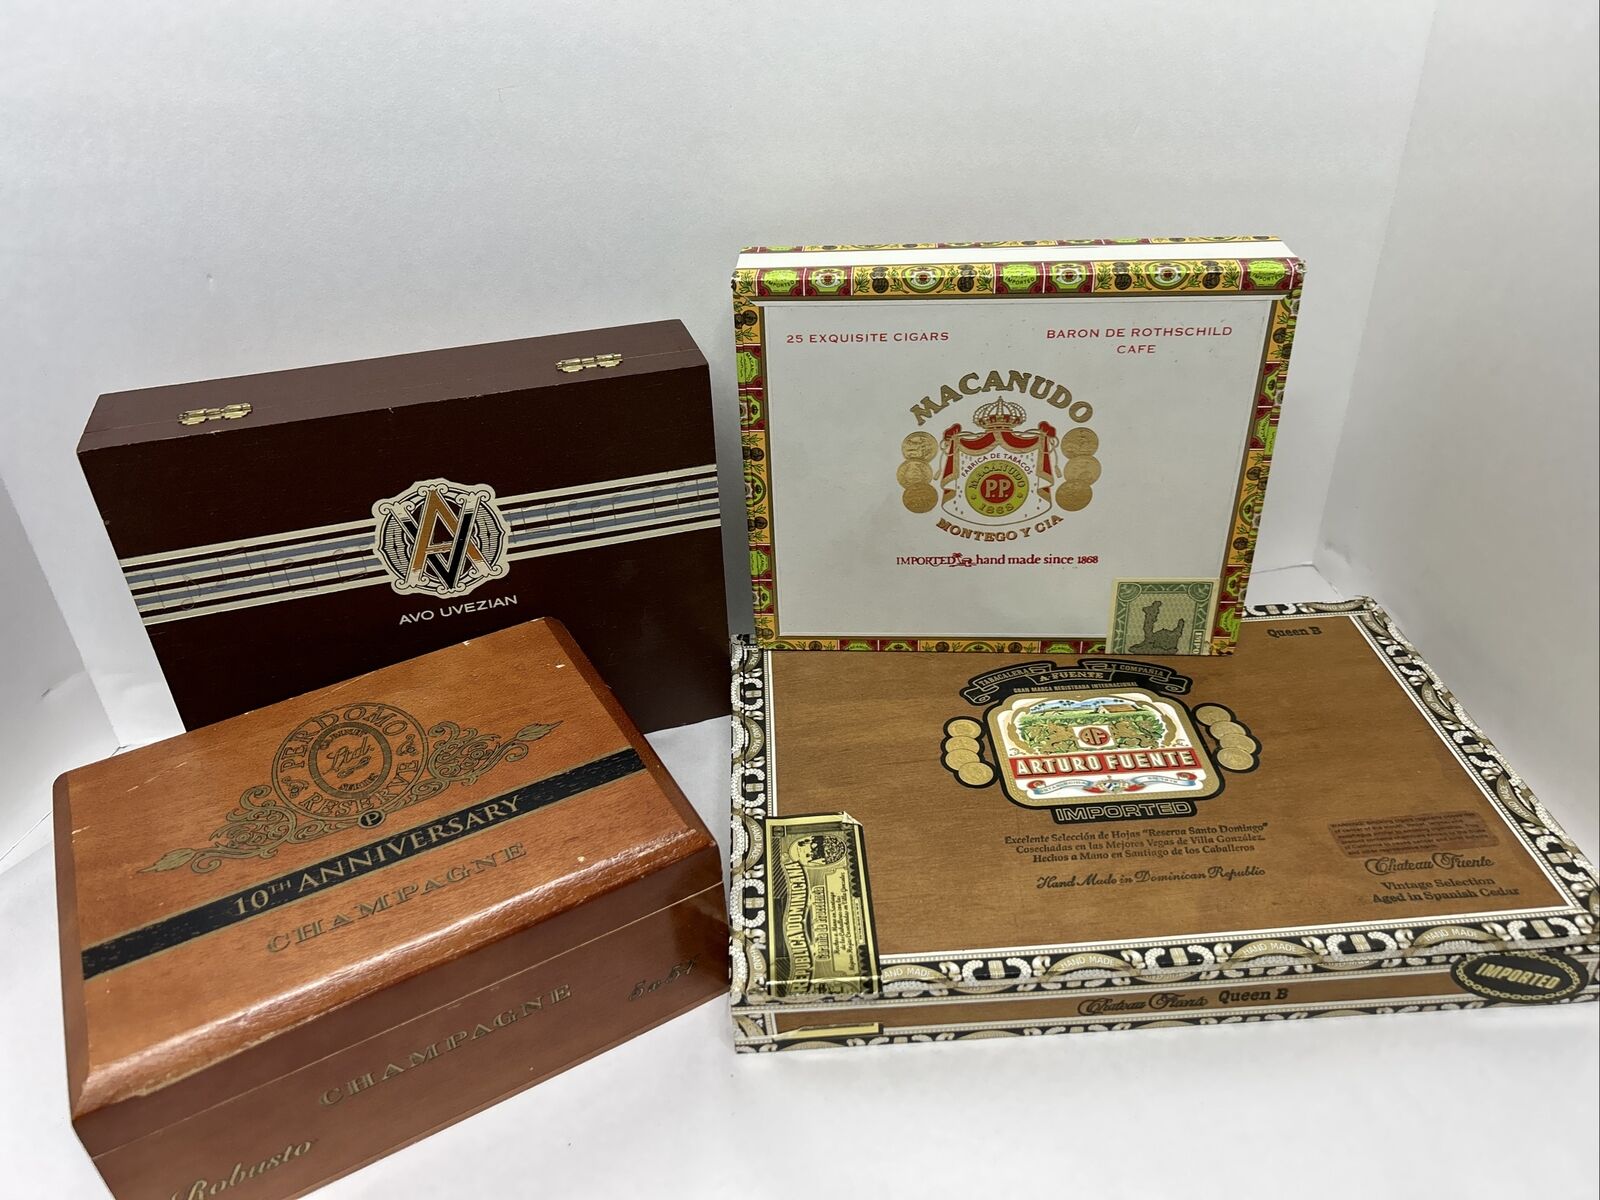 Lot of 4 Cigar Boxes Avo Uvezian, Arturo Fuente, Personified, Macanudo, Crafts